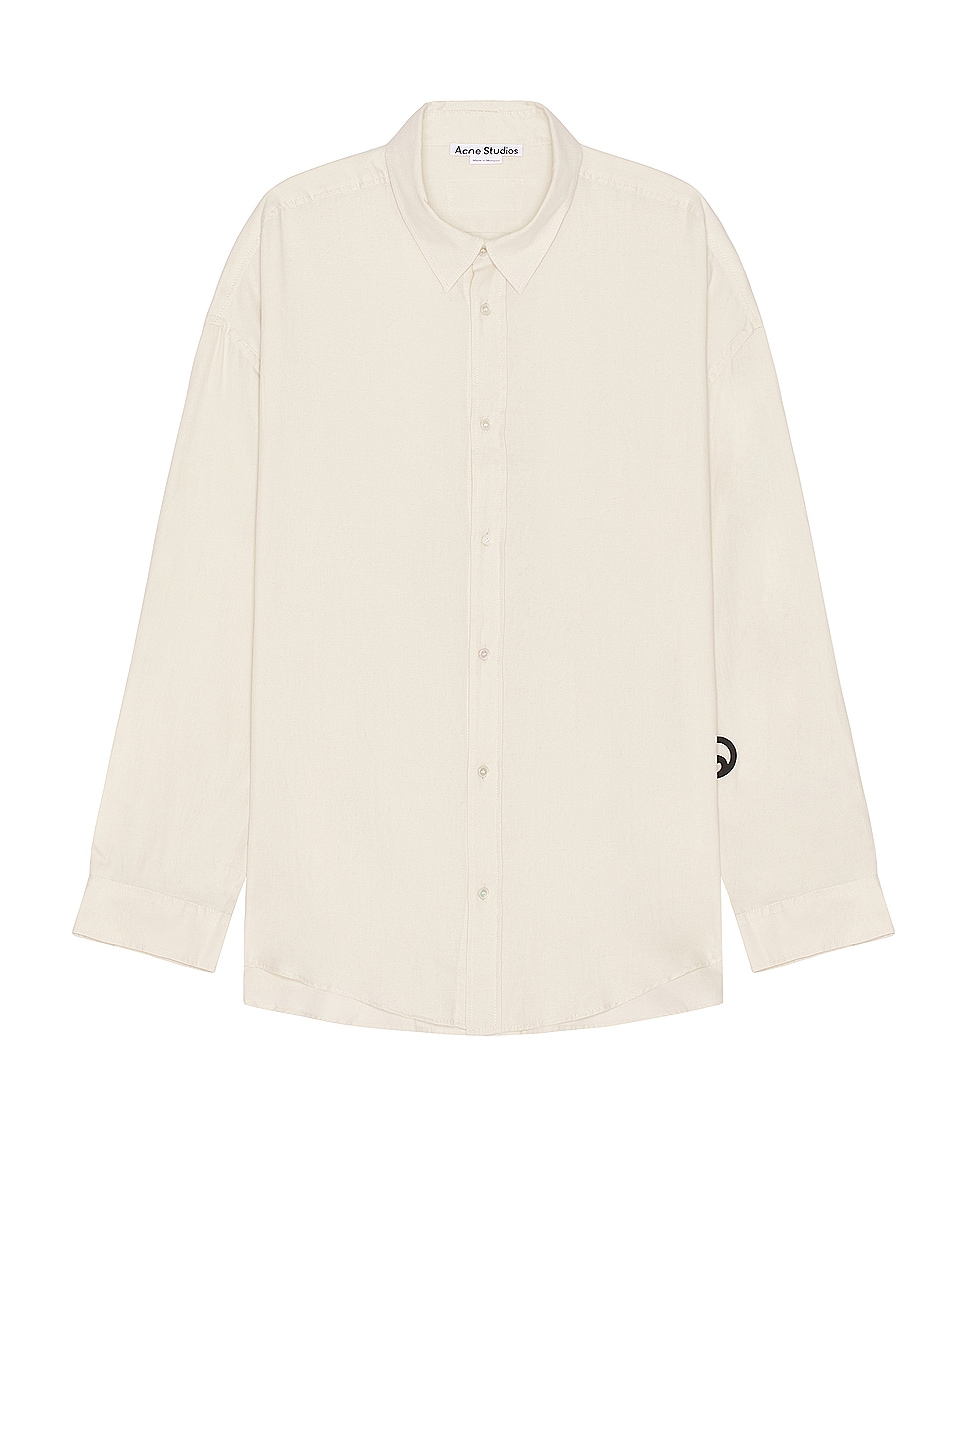 Image 1 of Acne Studios Long Sleeve Shirt in Off White